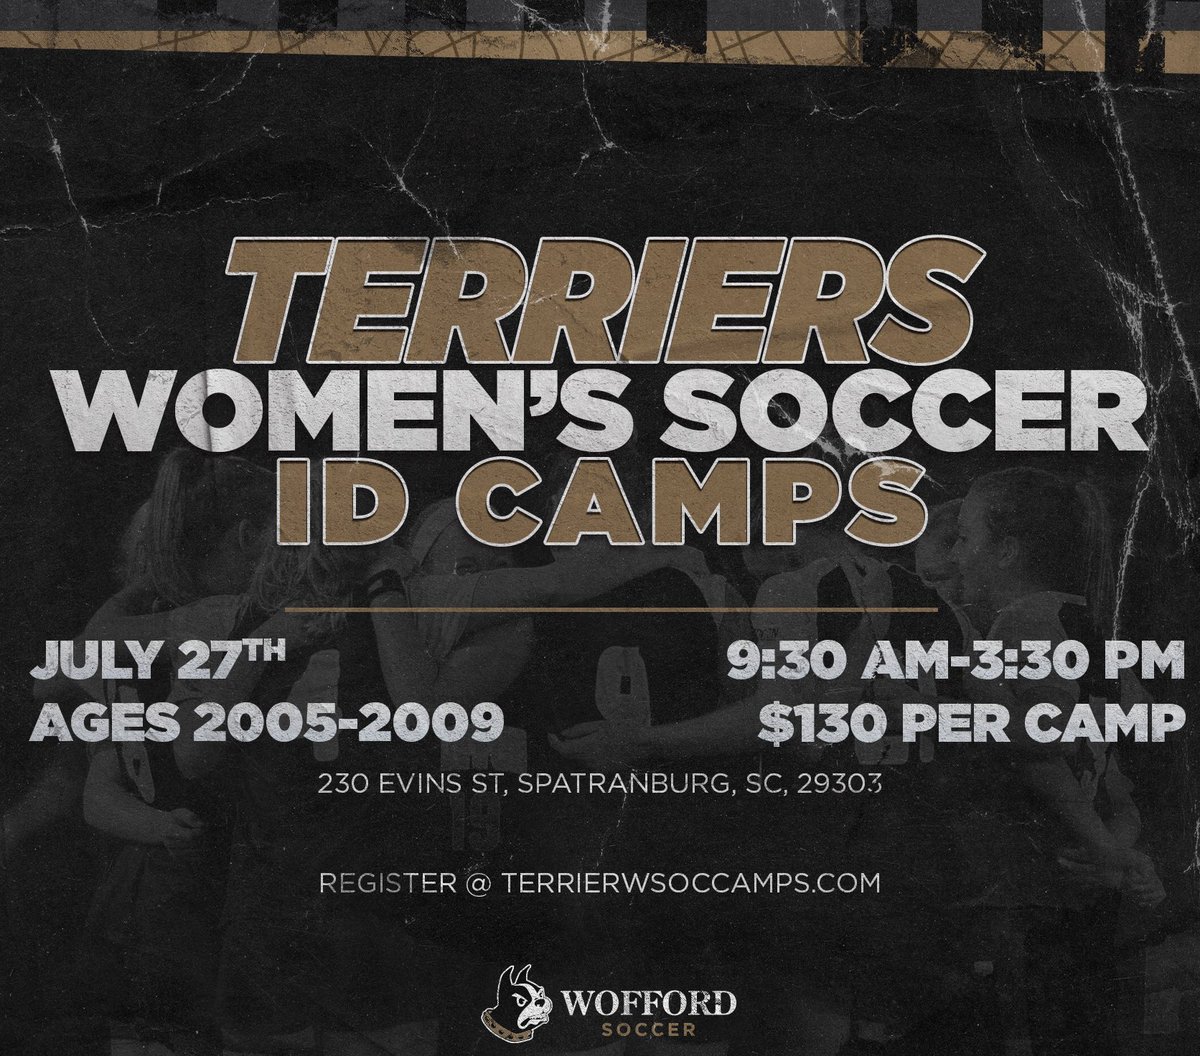 Thinking about playing at the next level? Looking for a camp to get you ready for high school or club season? If you answered yes click the link below to sign up for our ID camp on July 27th!  #GoTerriers 🐶⚽️

terrierwsoccamps.com/index.cfm?fbcl…